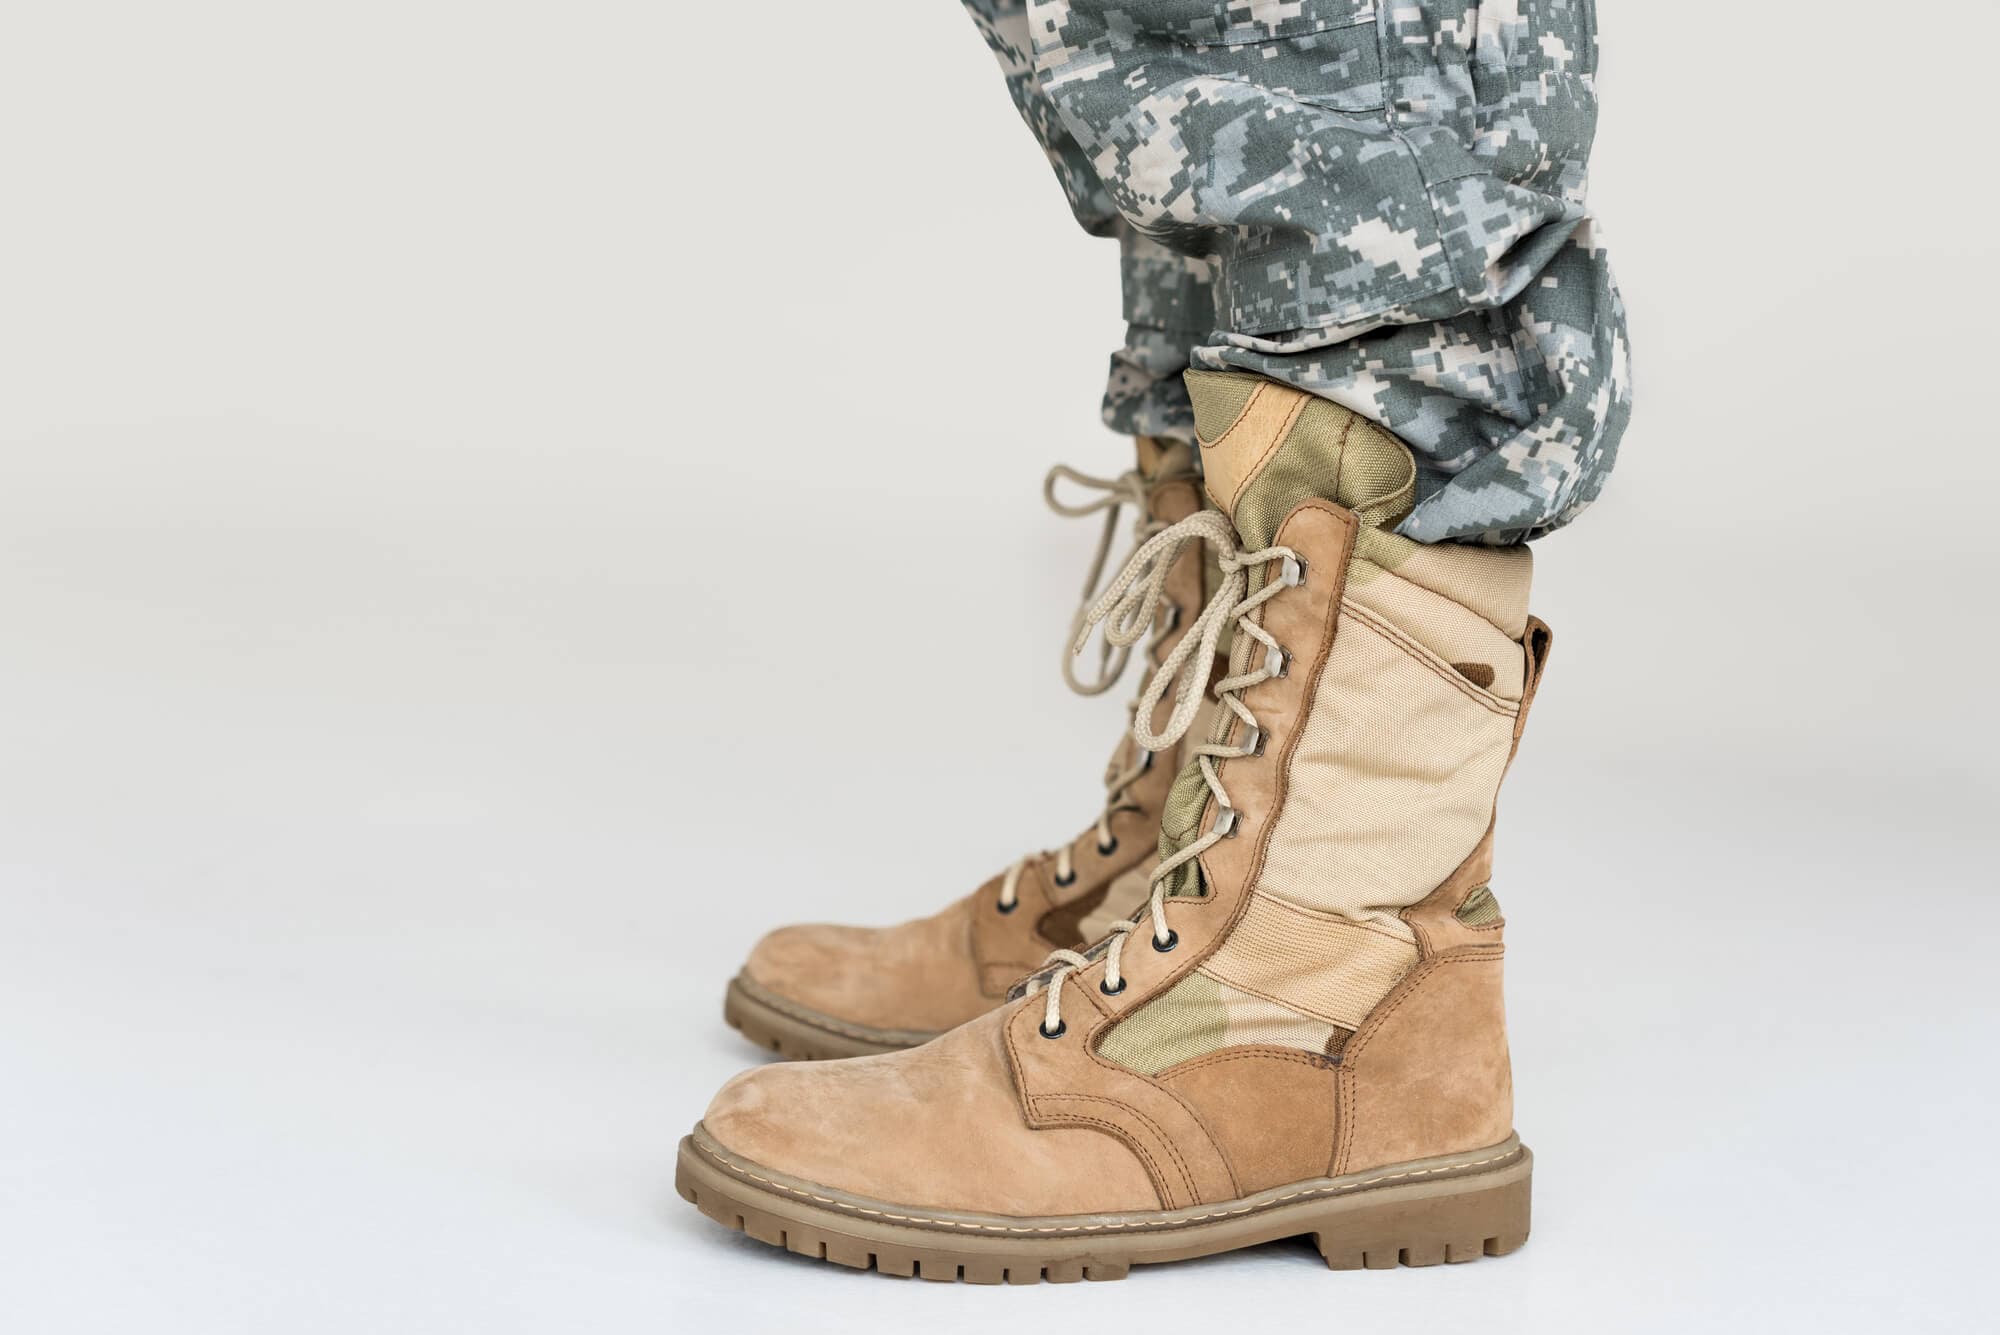 Best Army Boots: Stylish and Comfortable Foot Protection